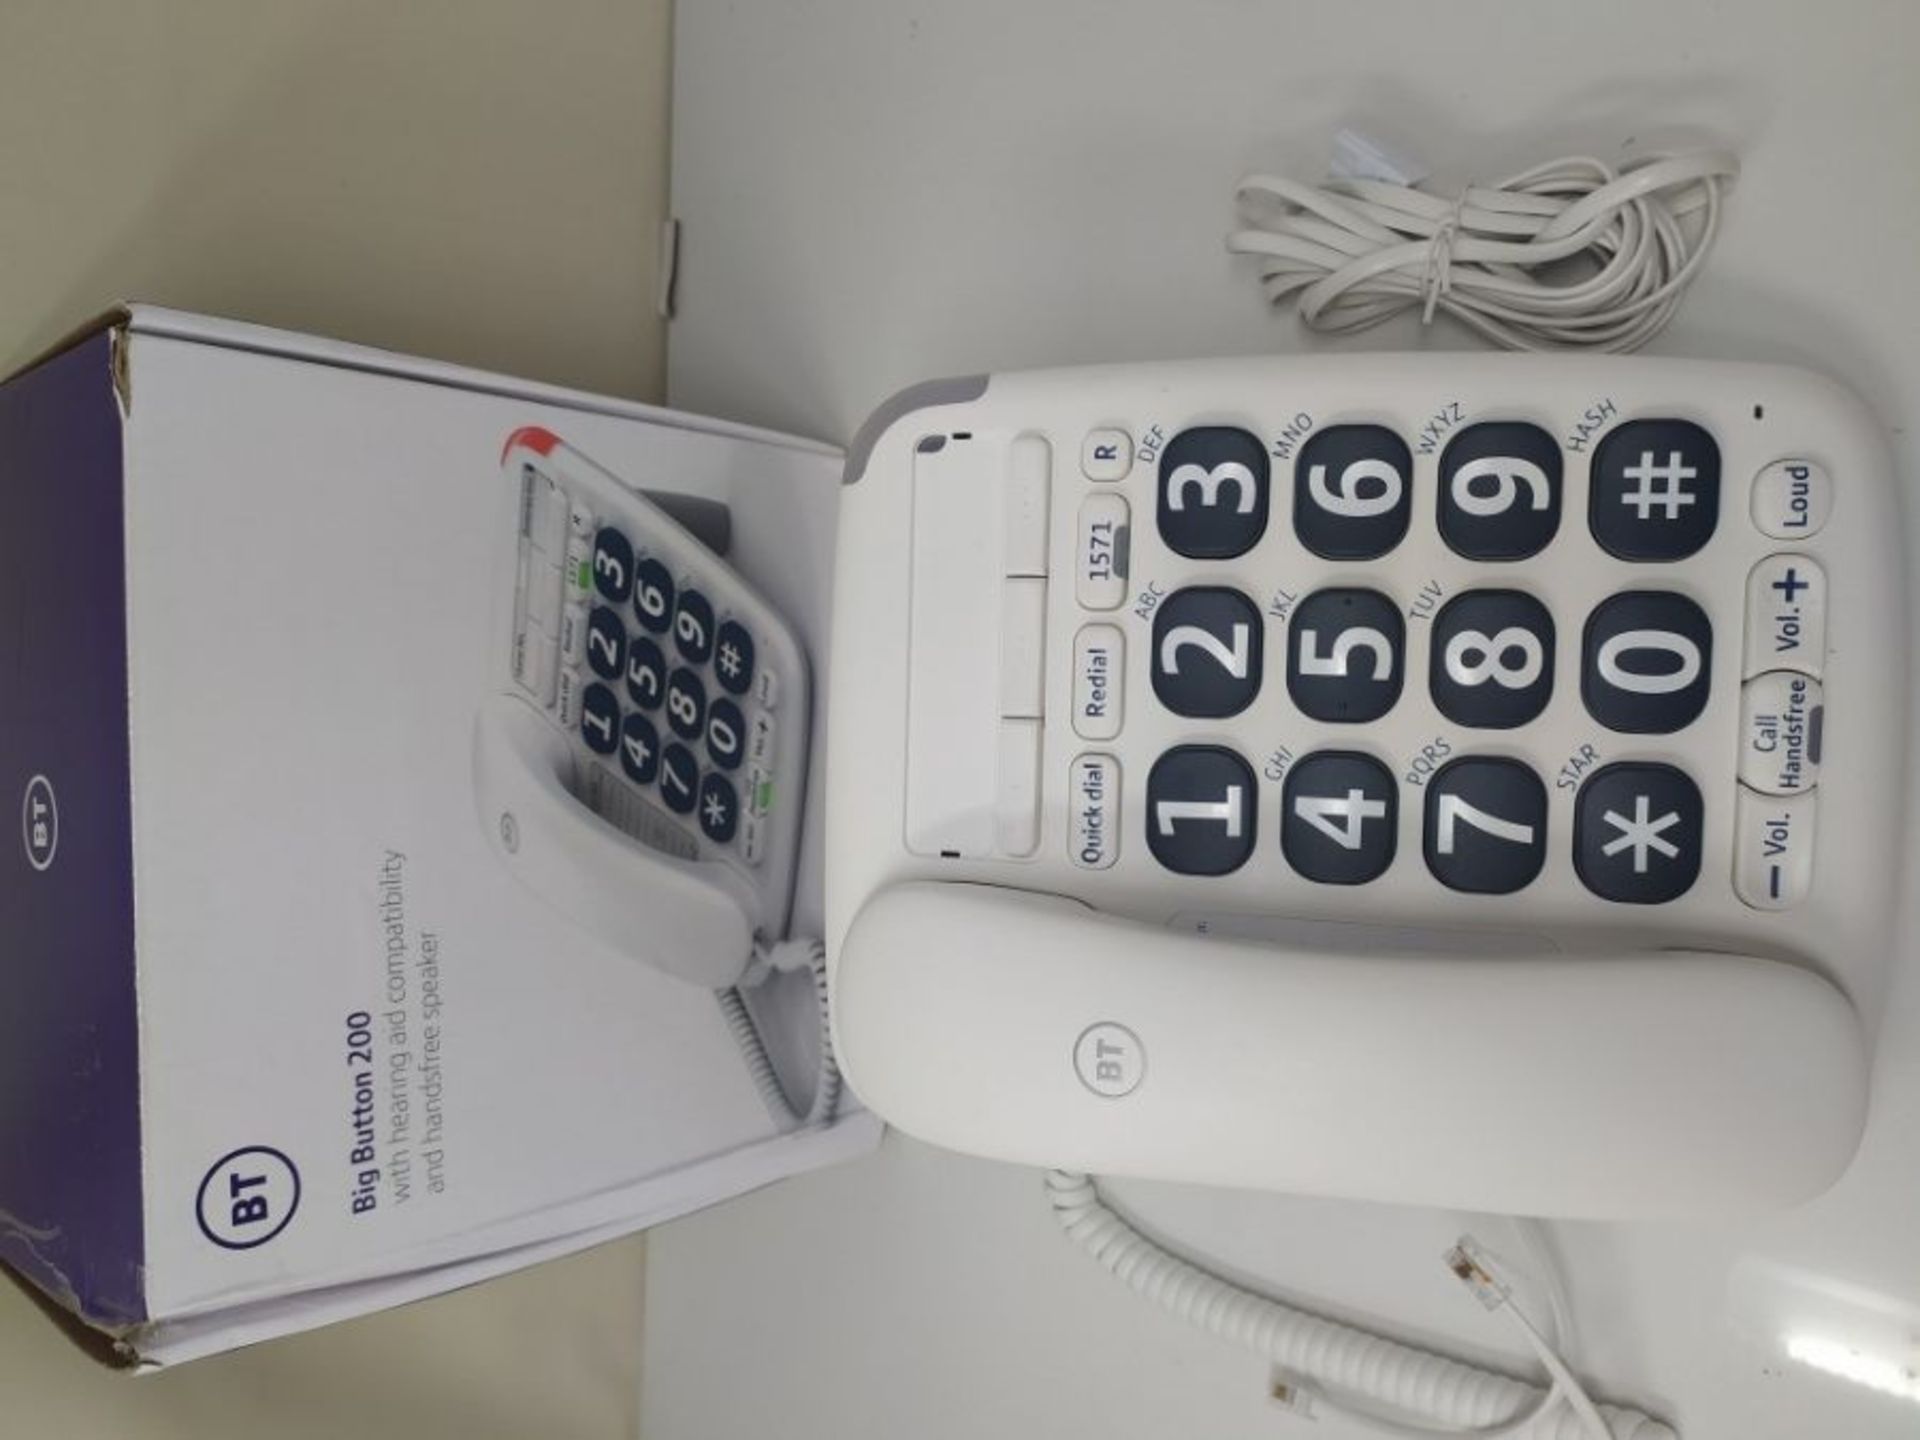 BT Big Button 200 Corded Telephone, White - Image 2 of 2